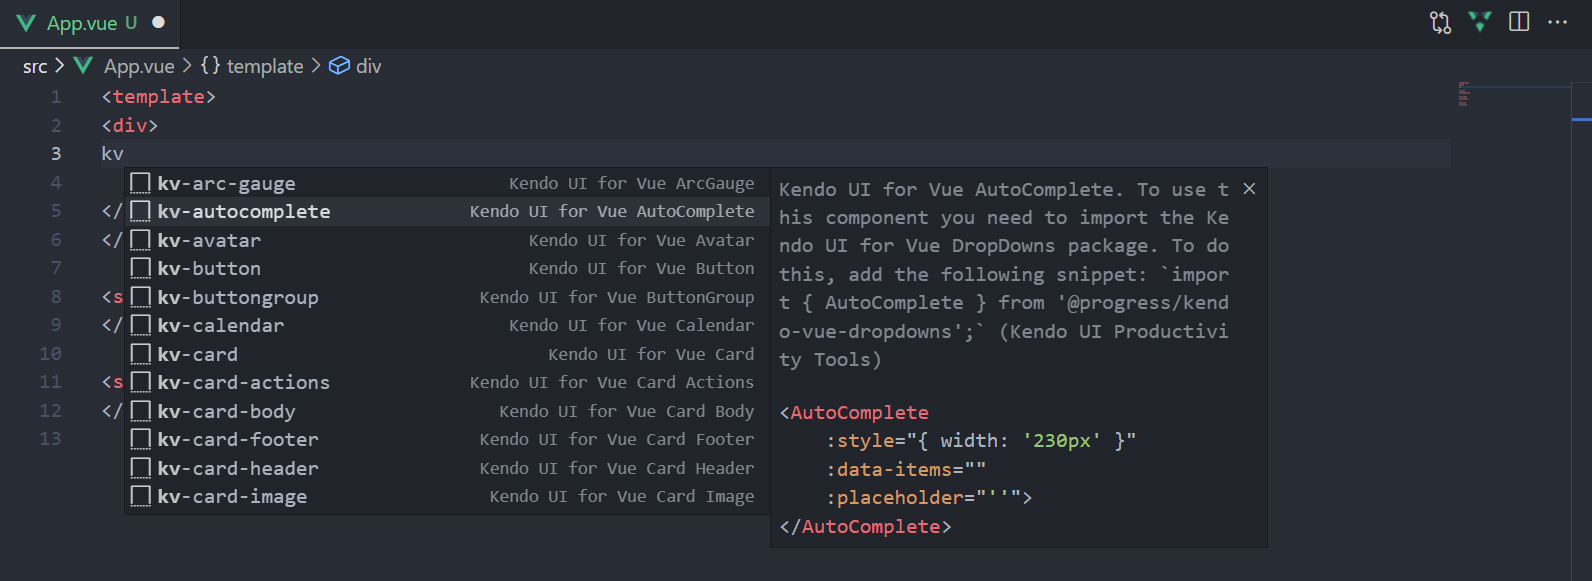 Kendo UI for Vue Code Snippets